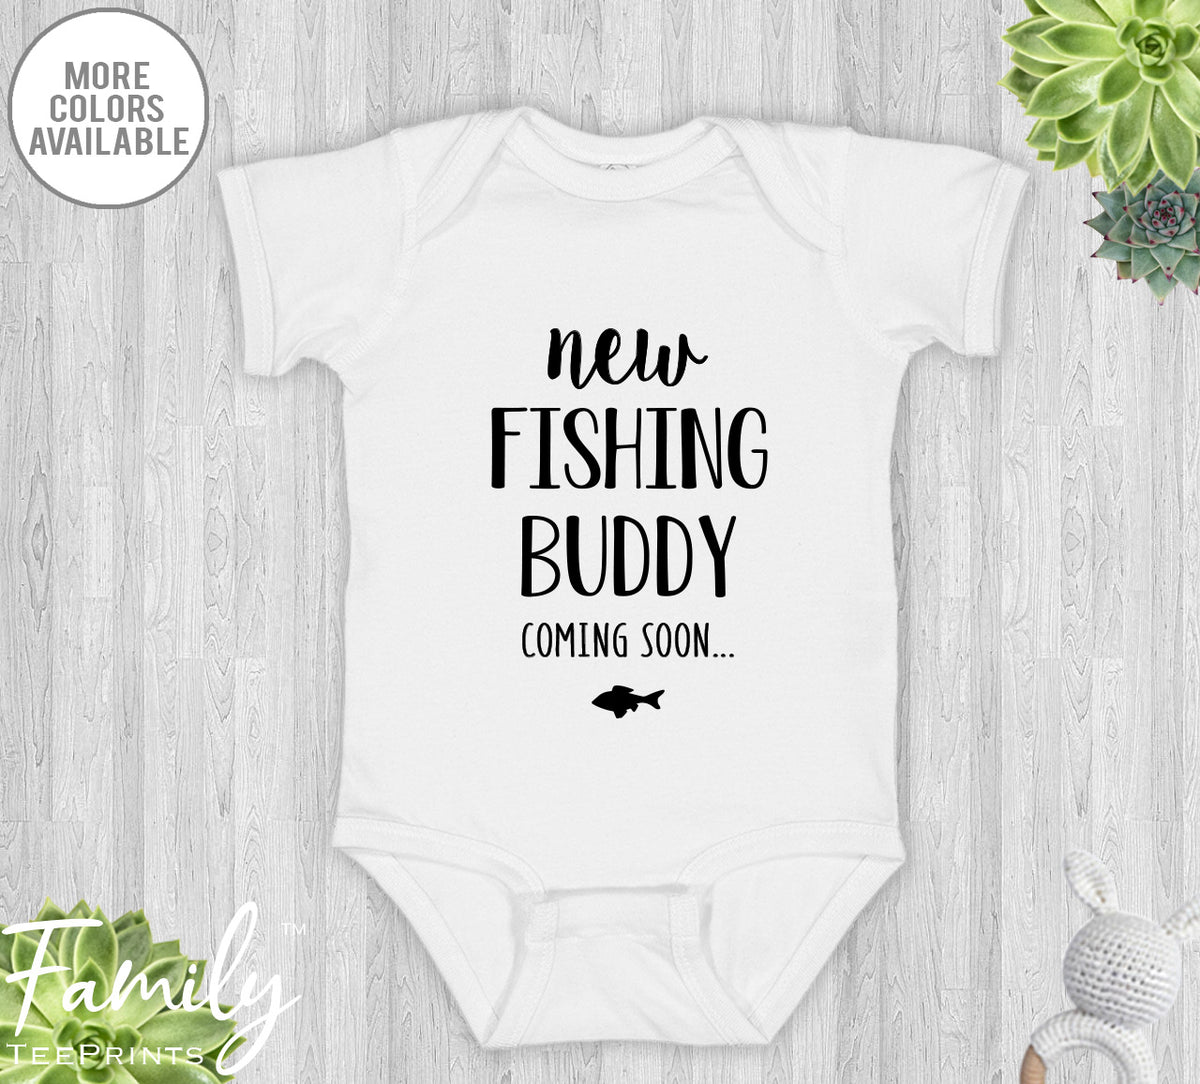 New Fishing Buddy Coming Soon - Baby Onesie - Pregnancy Reveal Gift - Baby Announcement Heather Grey / 12 Months